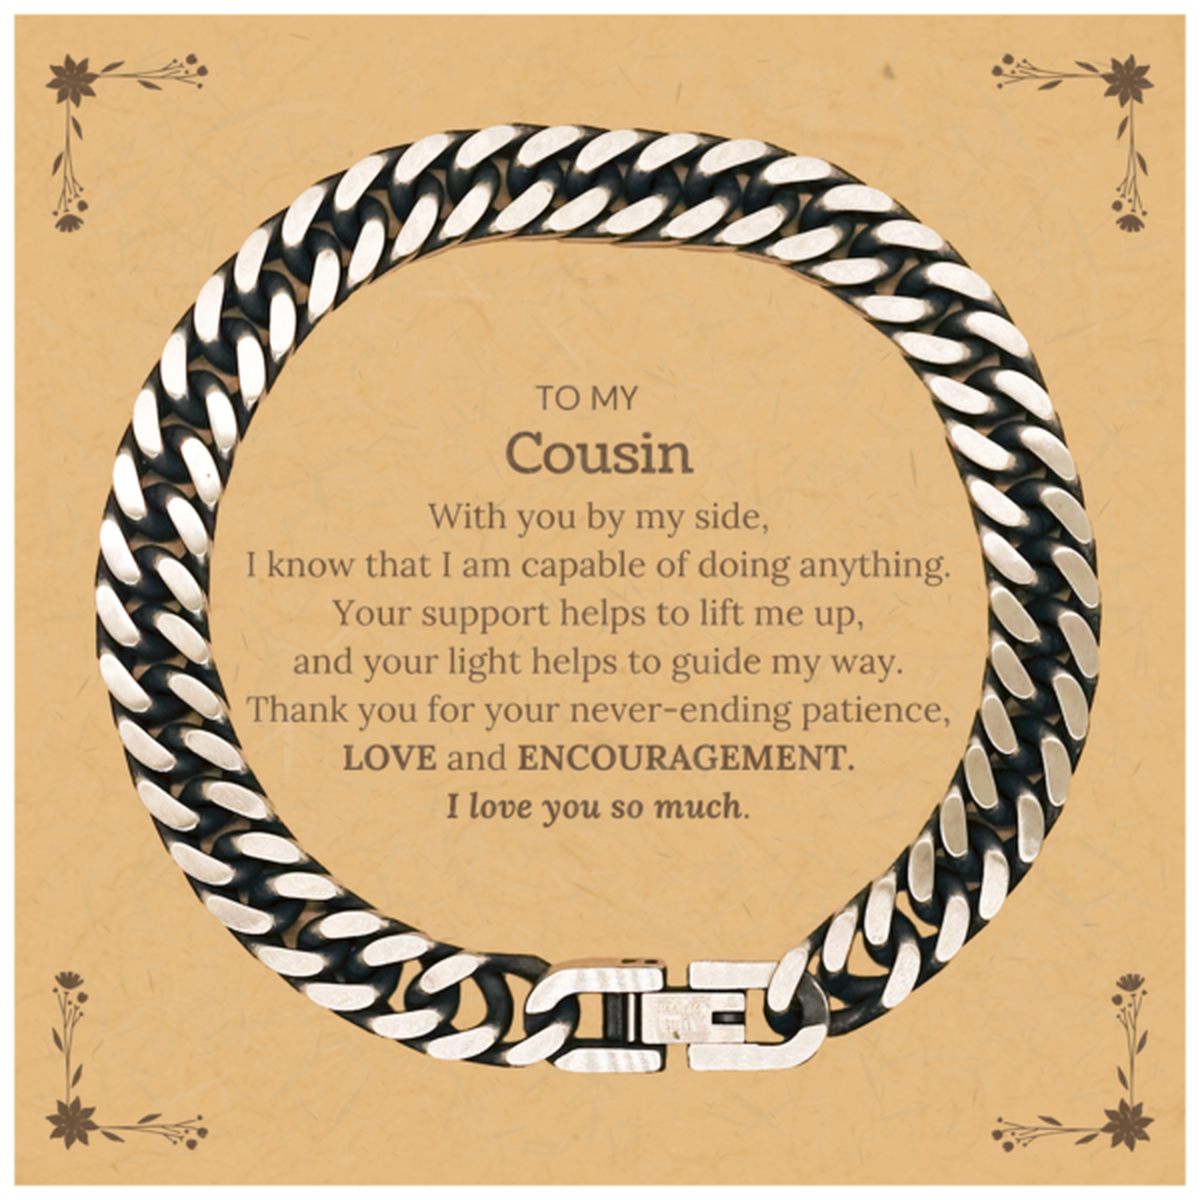 Appreciation Cousin Cuban Link Chain Bracelet Gifts, To My Cousin Birthday Christmas Wedding Keepsake Gifts for Cousin With you by my side, I know that I am capable of doing anything. I love you so much